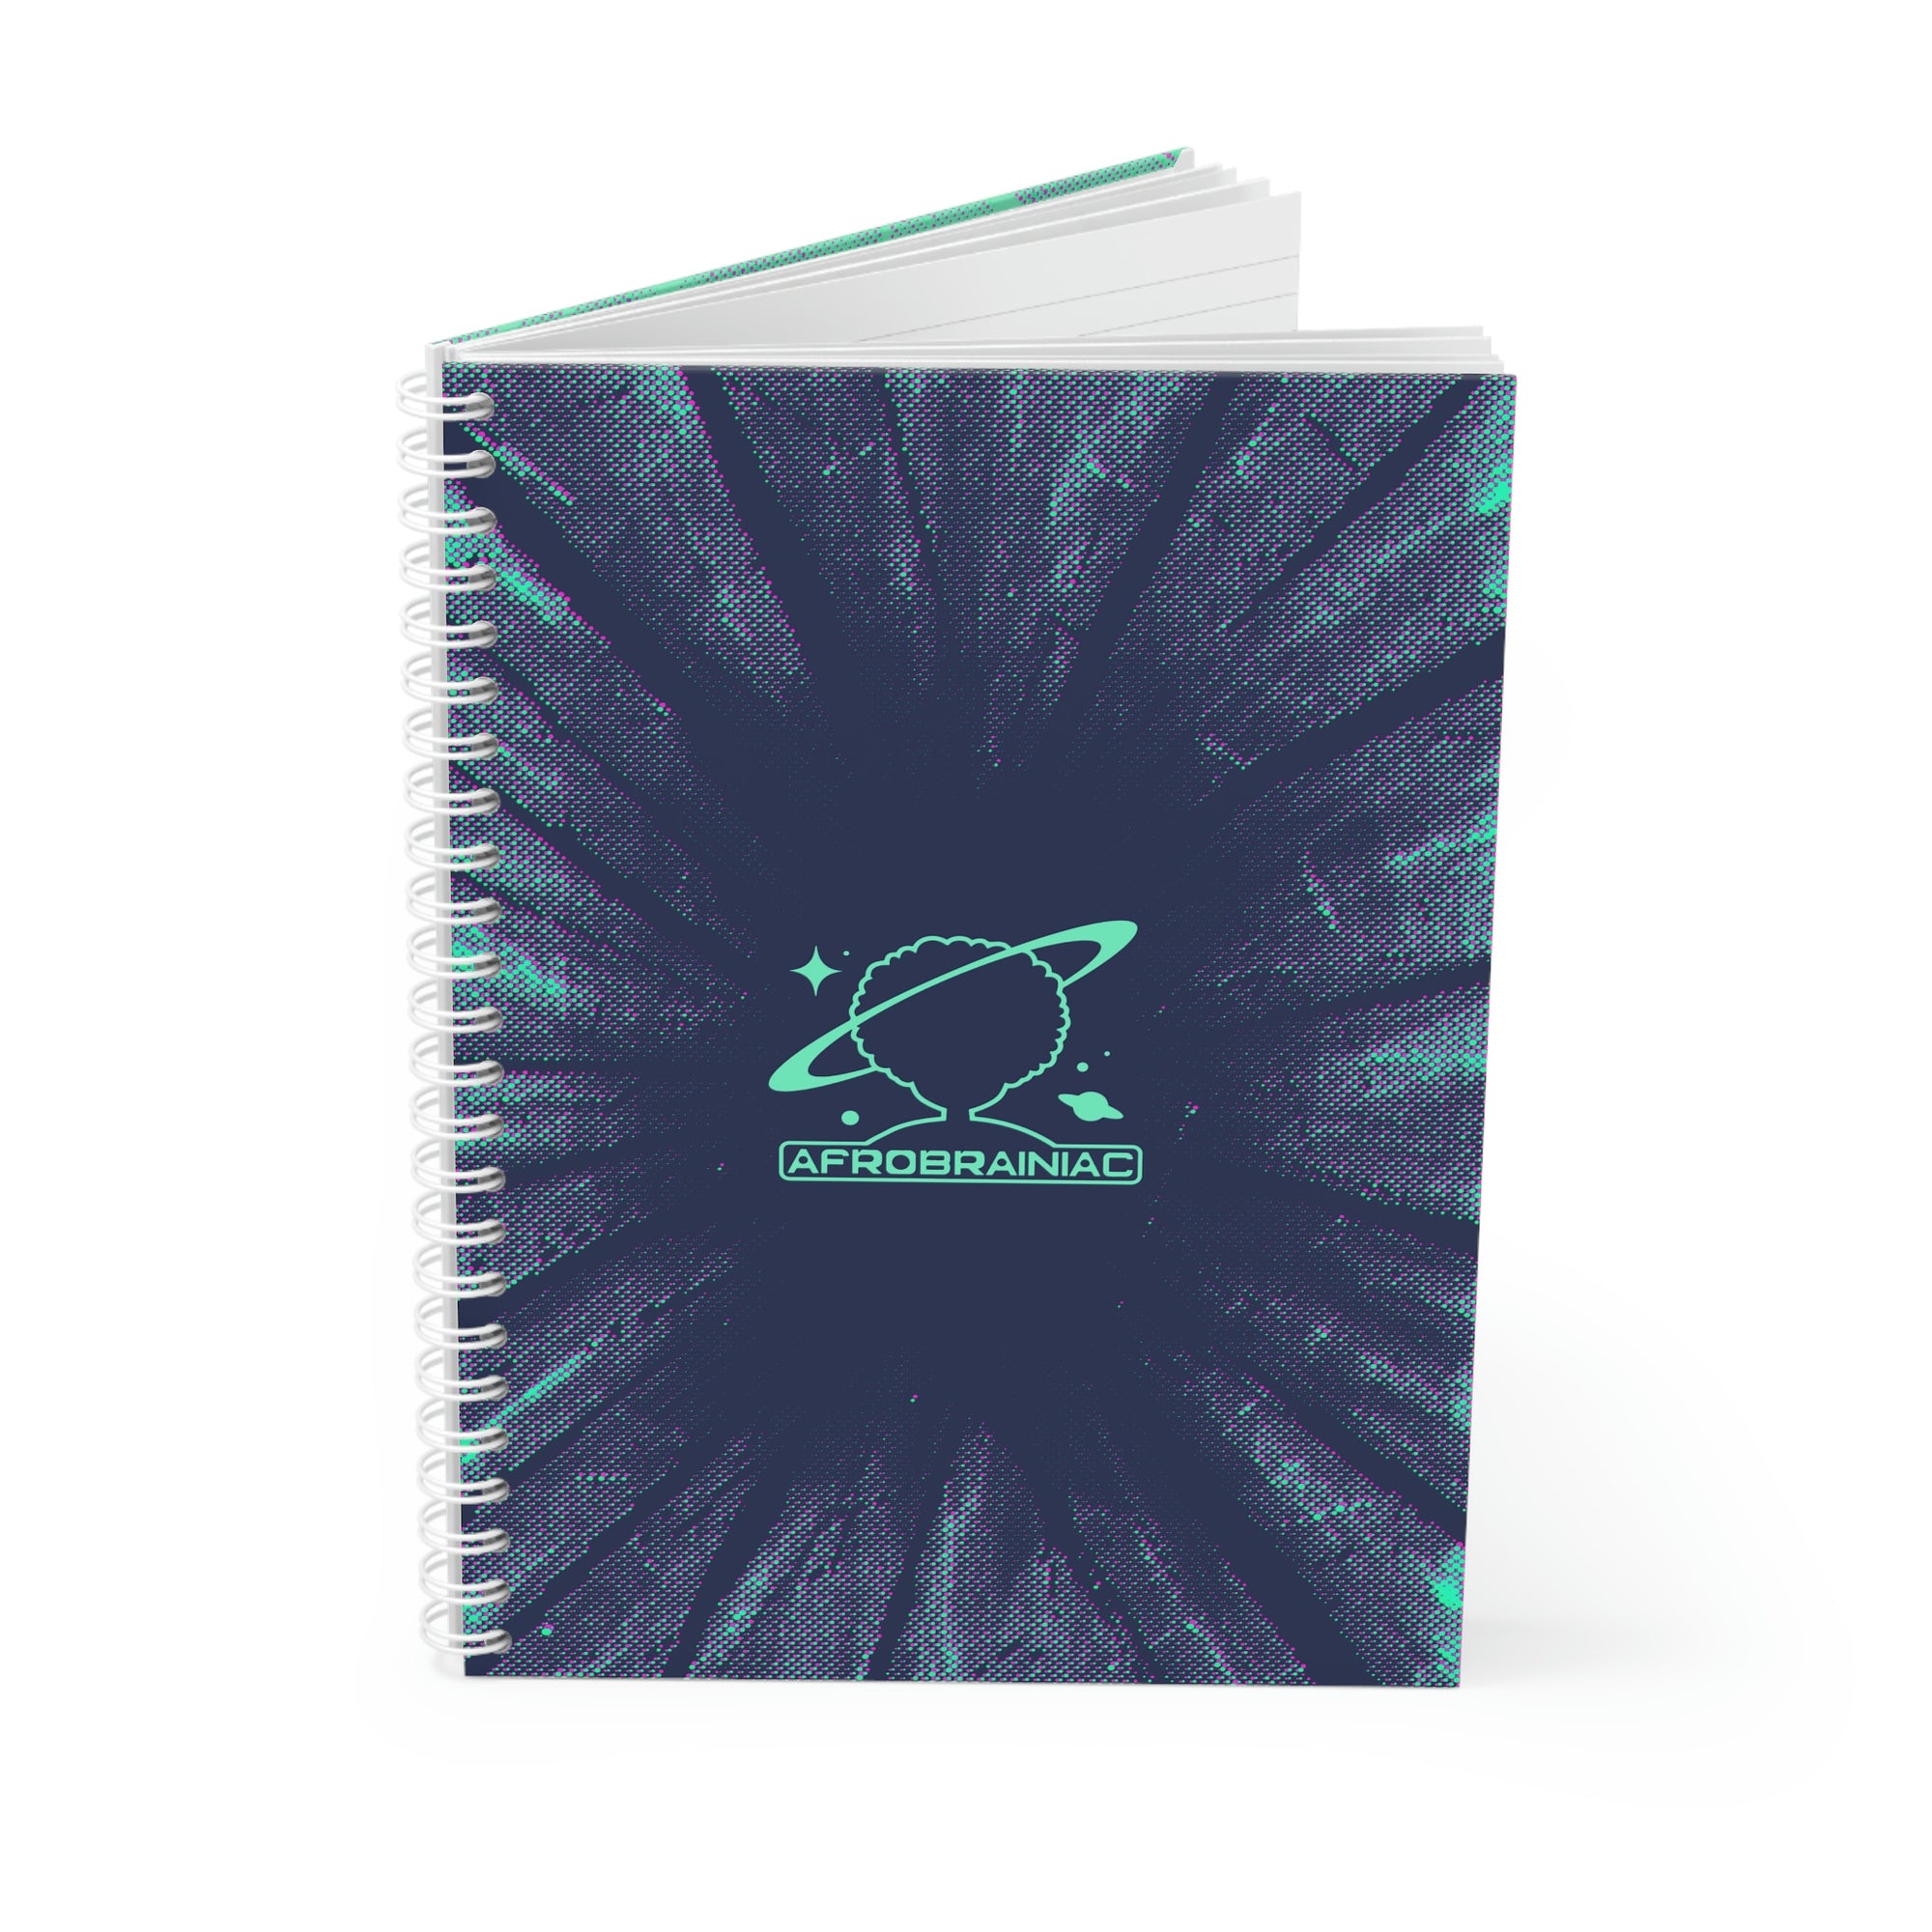 AB "Welcome To The Future" Spiral Notebook